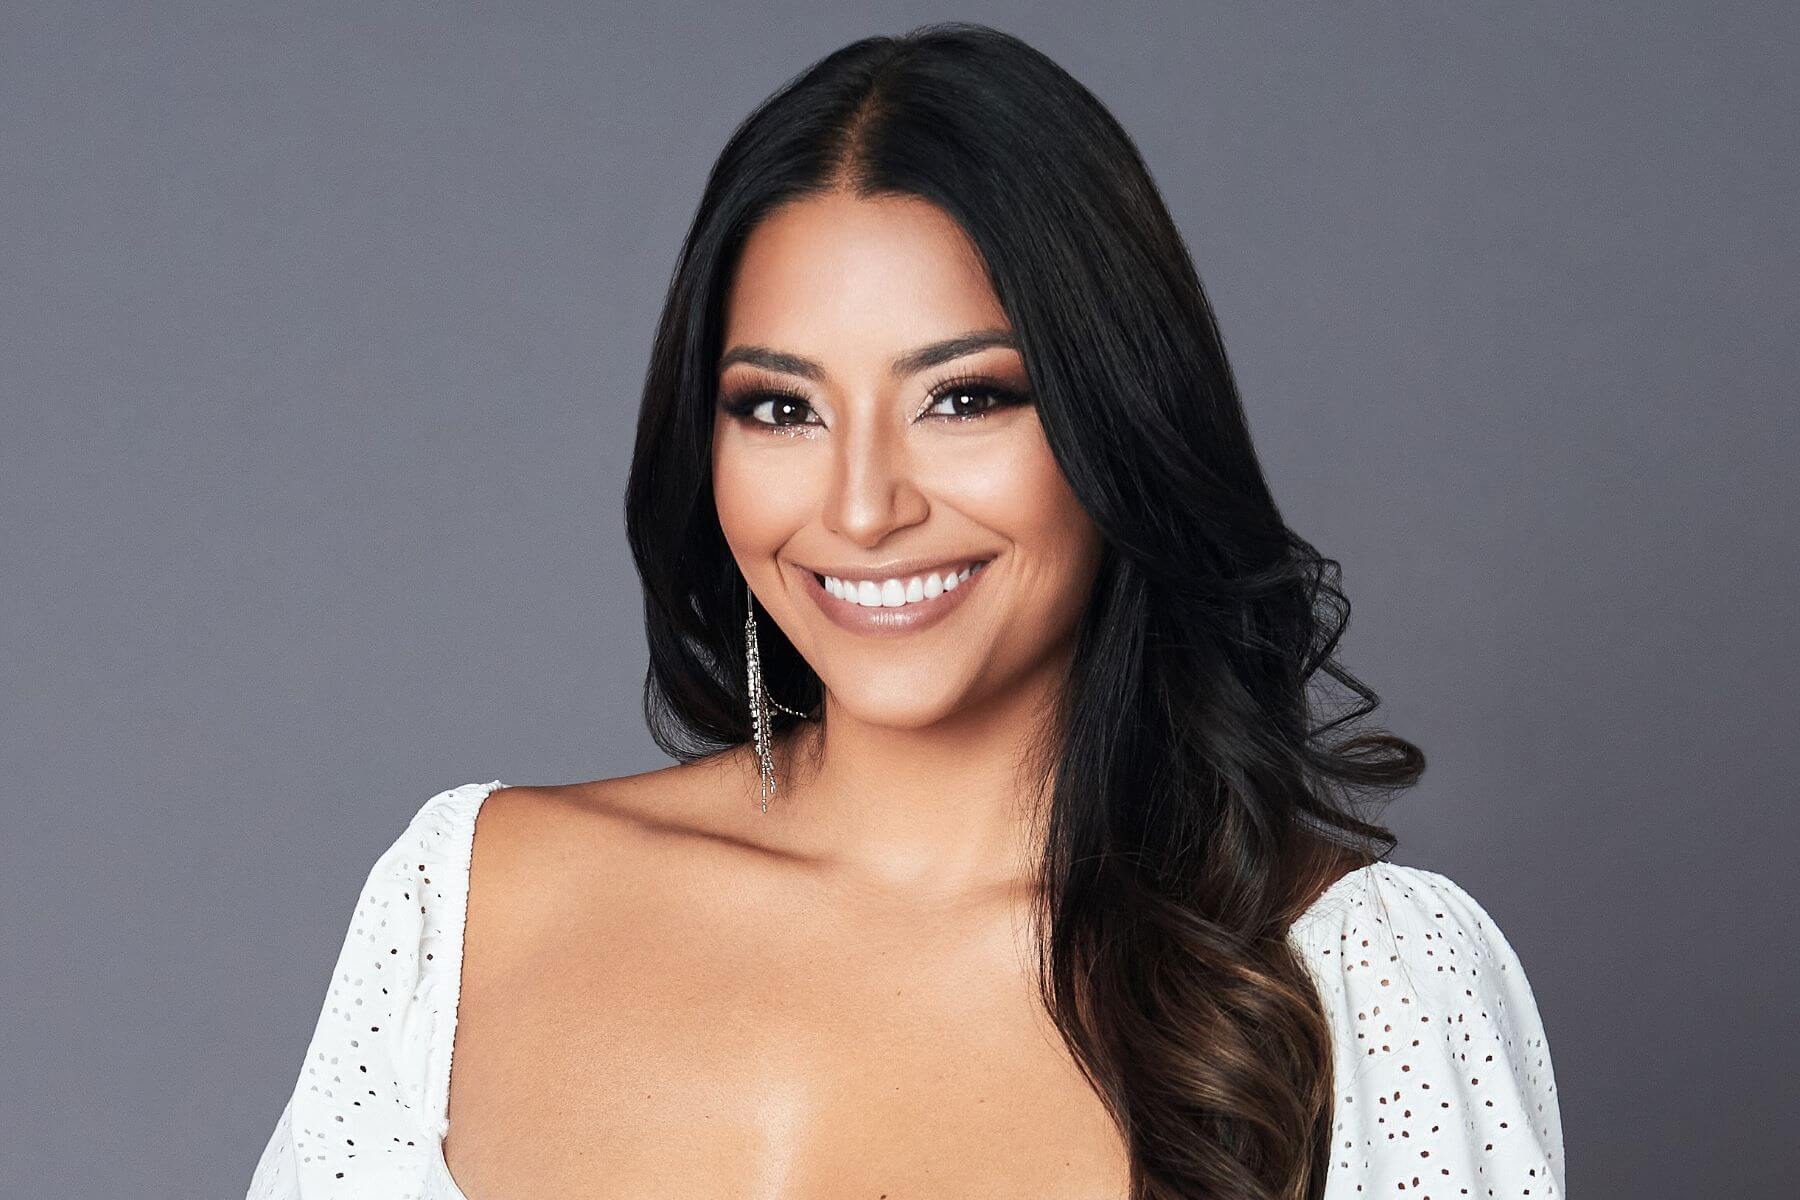 Anissa Aguilar, who is a part of the 'Are You the One?' Season 9 Cast, wears a white top in her promotional photo.